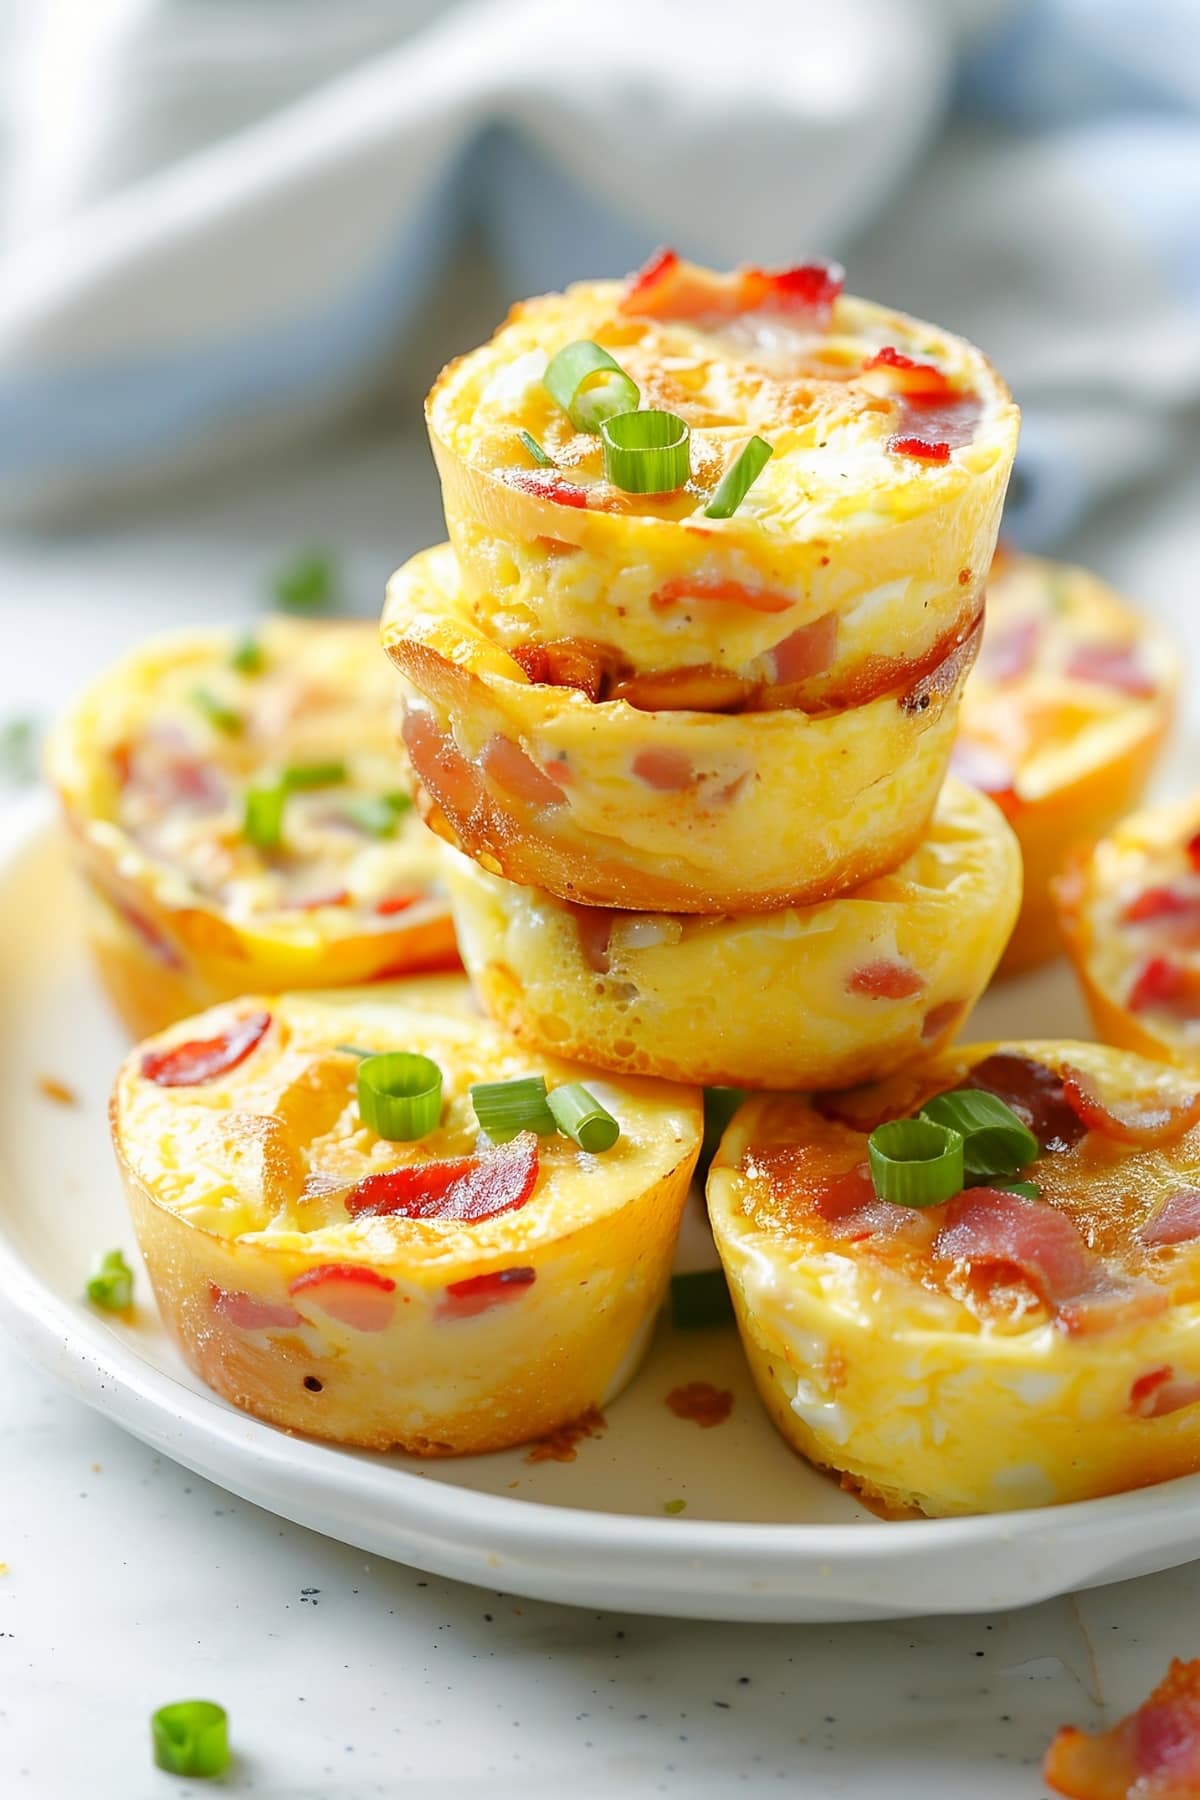 Rich and savory homemade starbucks egg bites with bacon